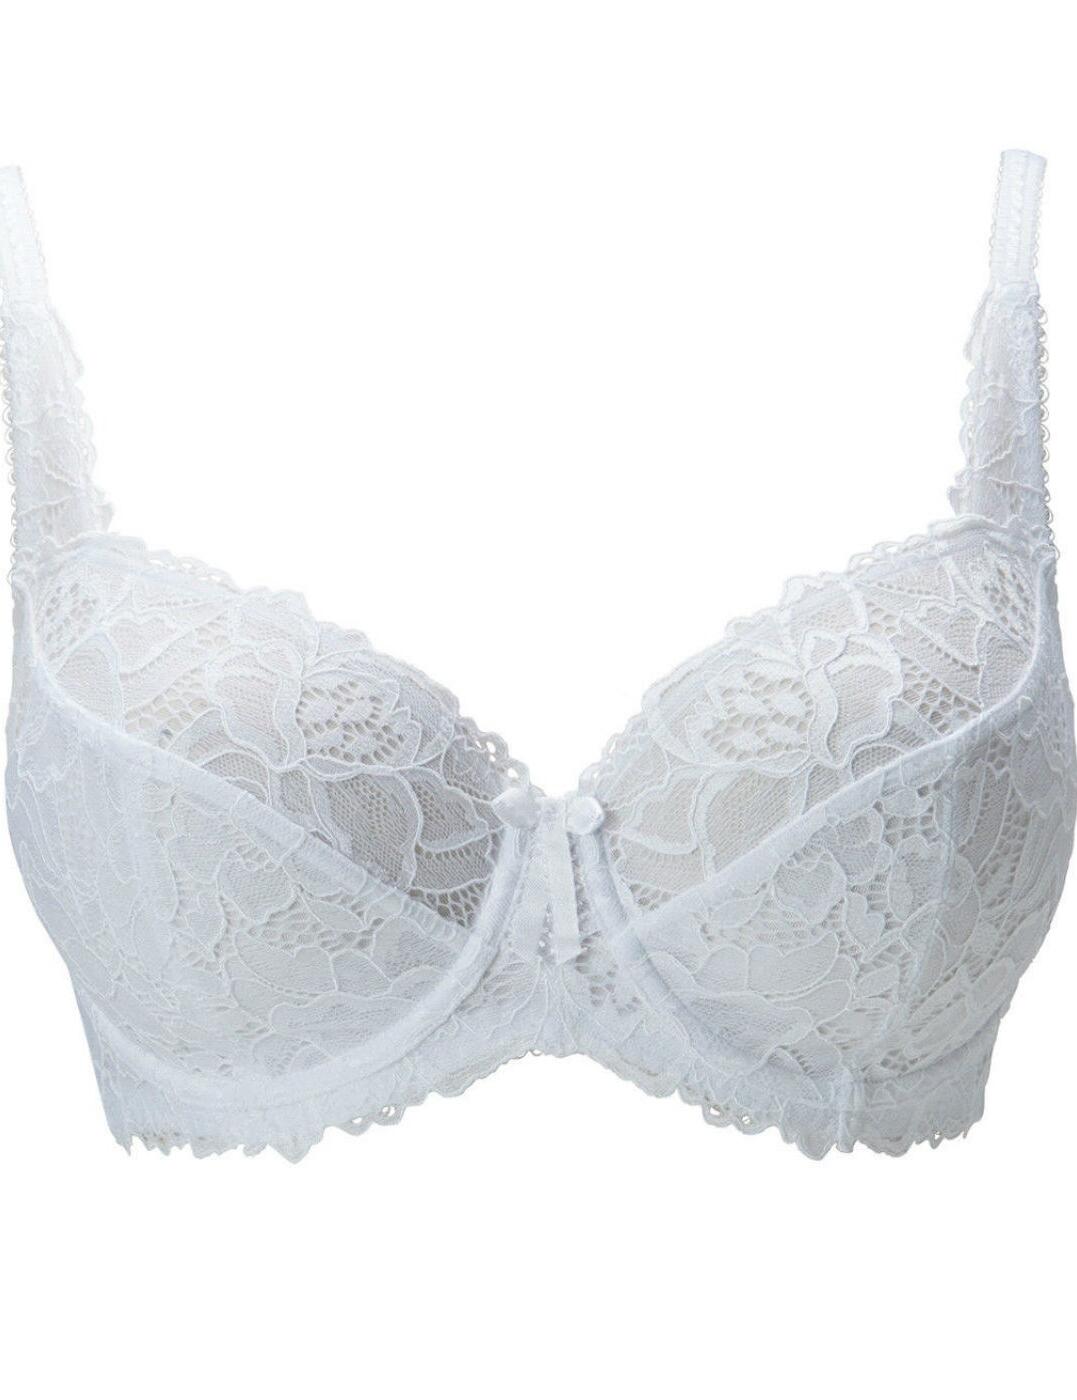 Pour Moi Serenity Underwired Full Cup Bra - Belle Lingerie | Pour Moi ...